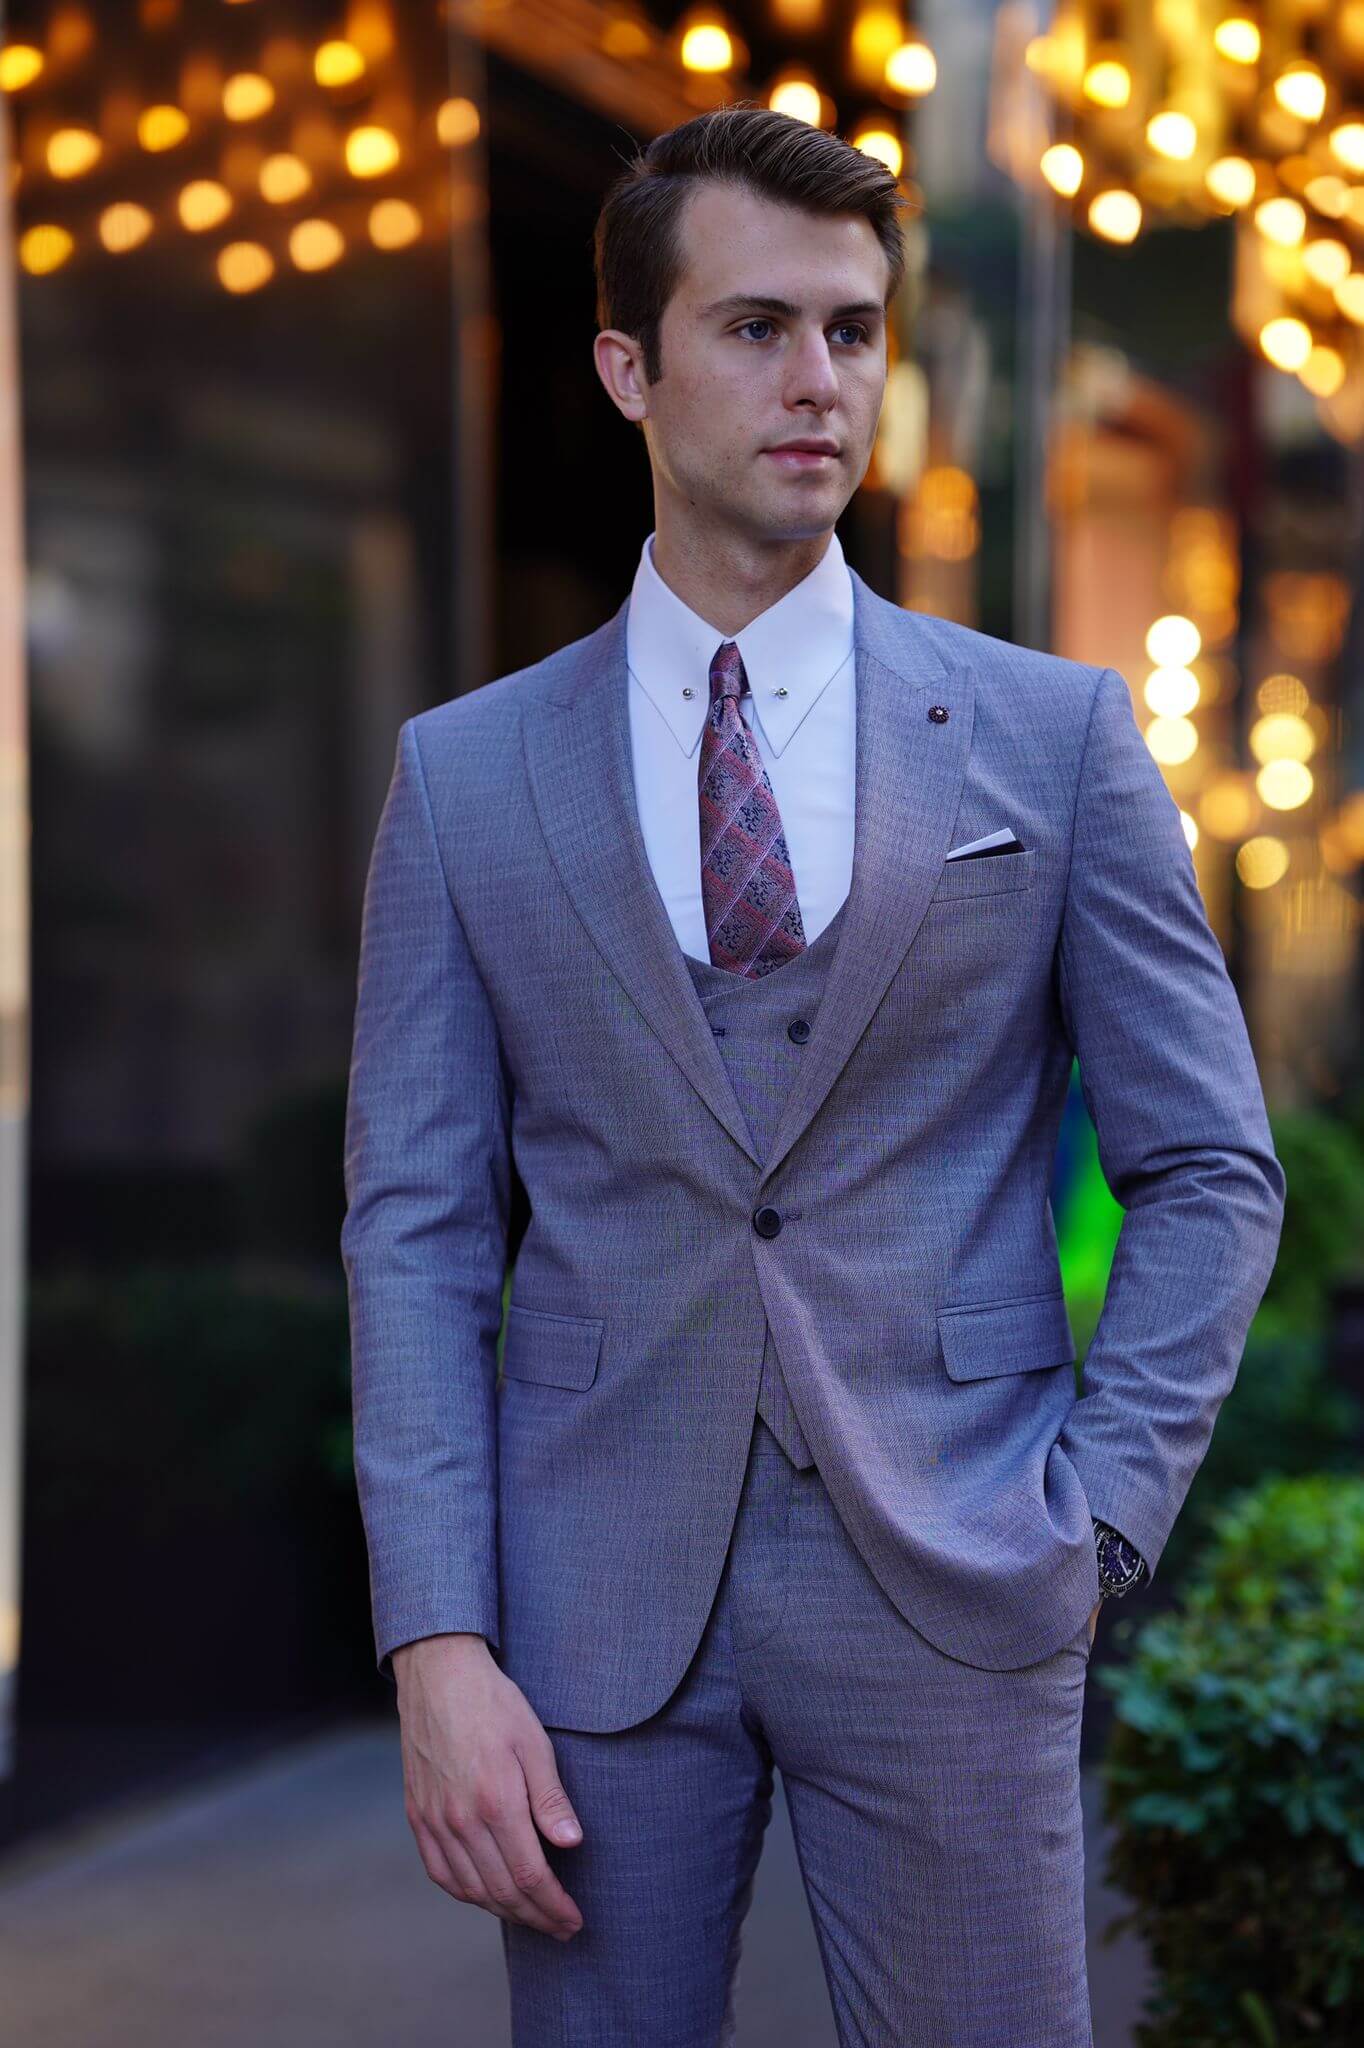 A Gray Wool Suit on display.